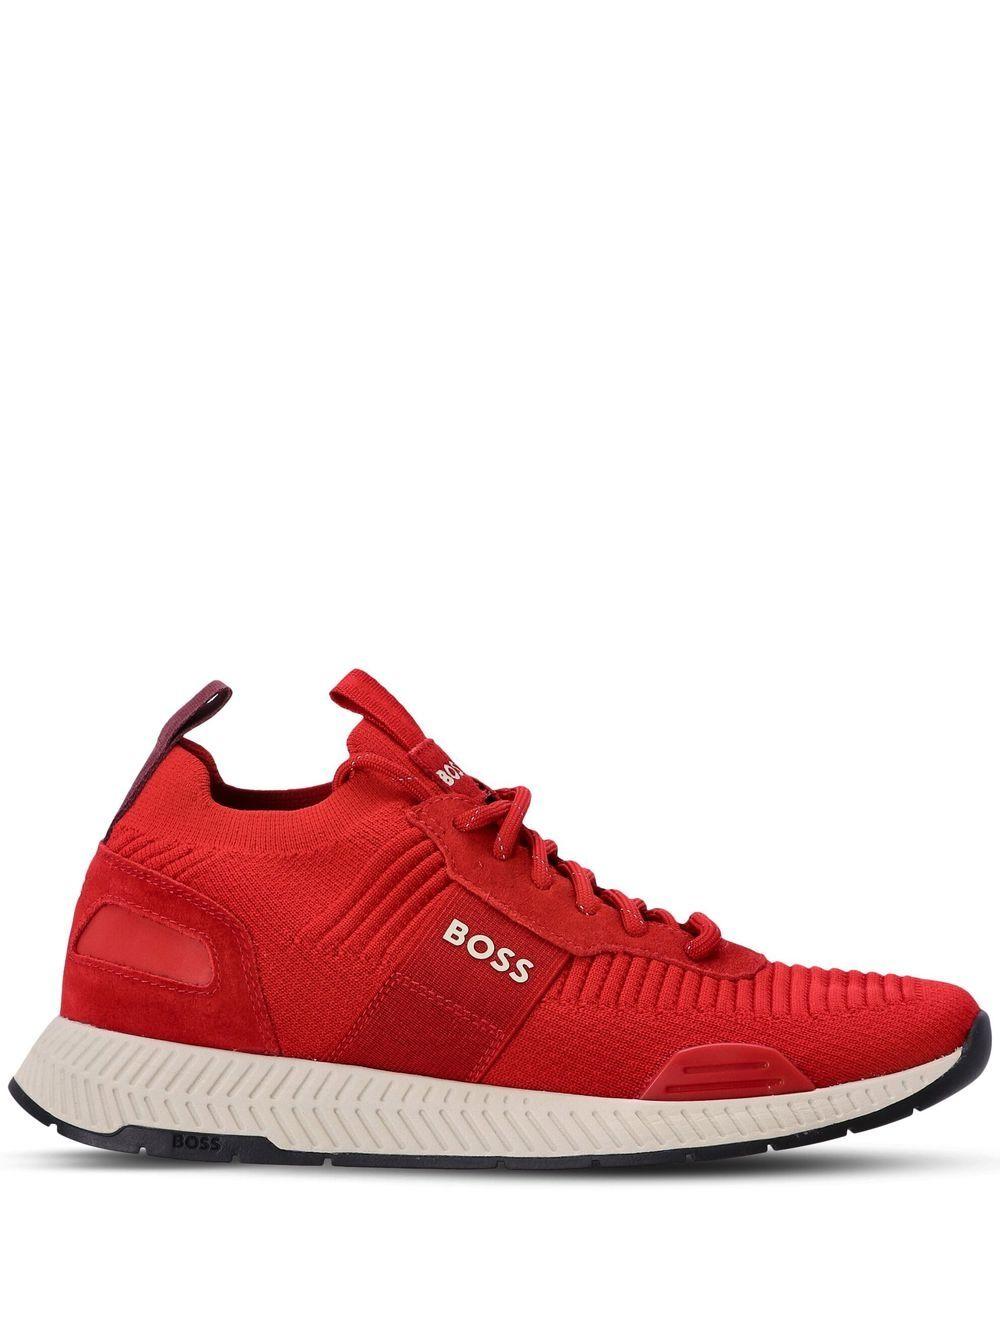 BOSS by HUGO BOSS Repreve Uppers Low-top Sneakers in Red for Men | Lyst